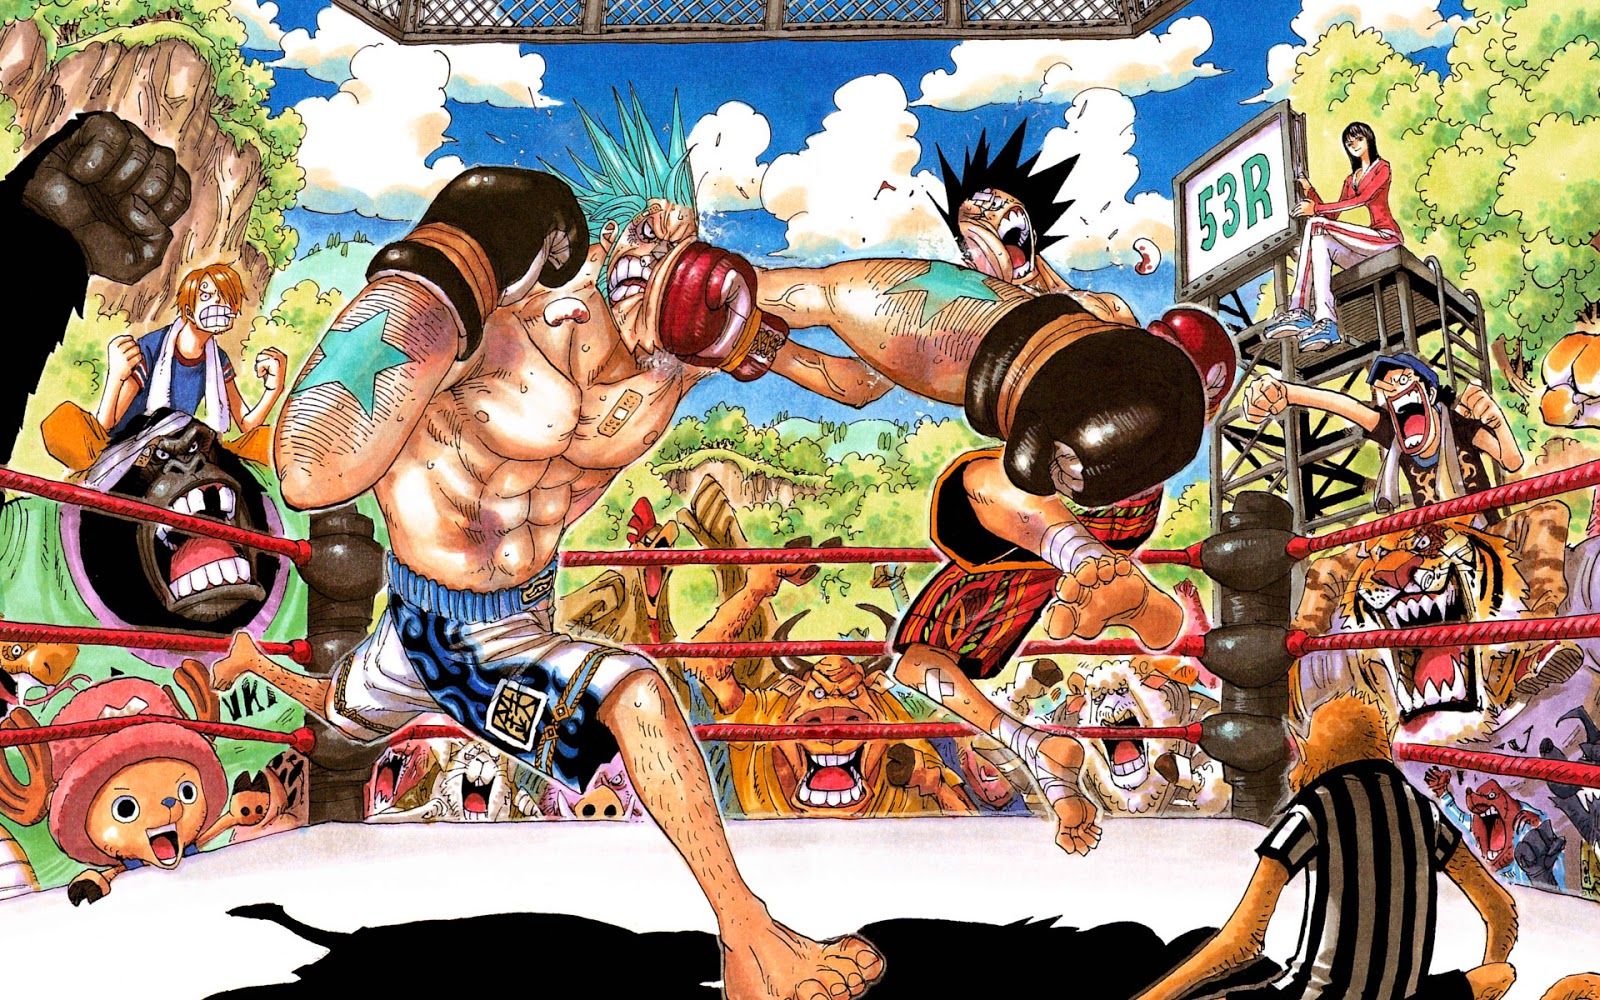 Franky One Piece 10 Free Hd Wallpapers.